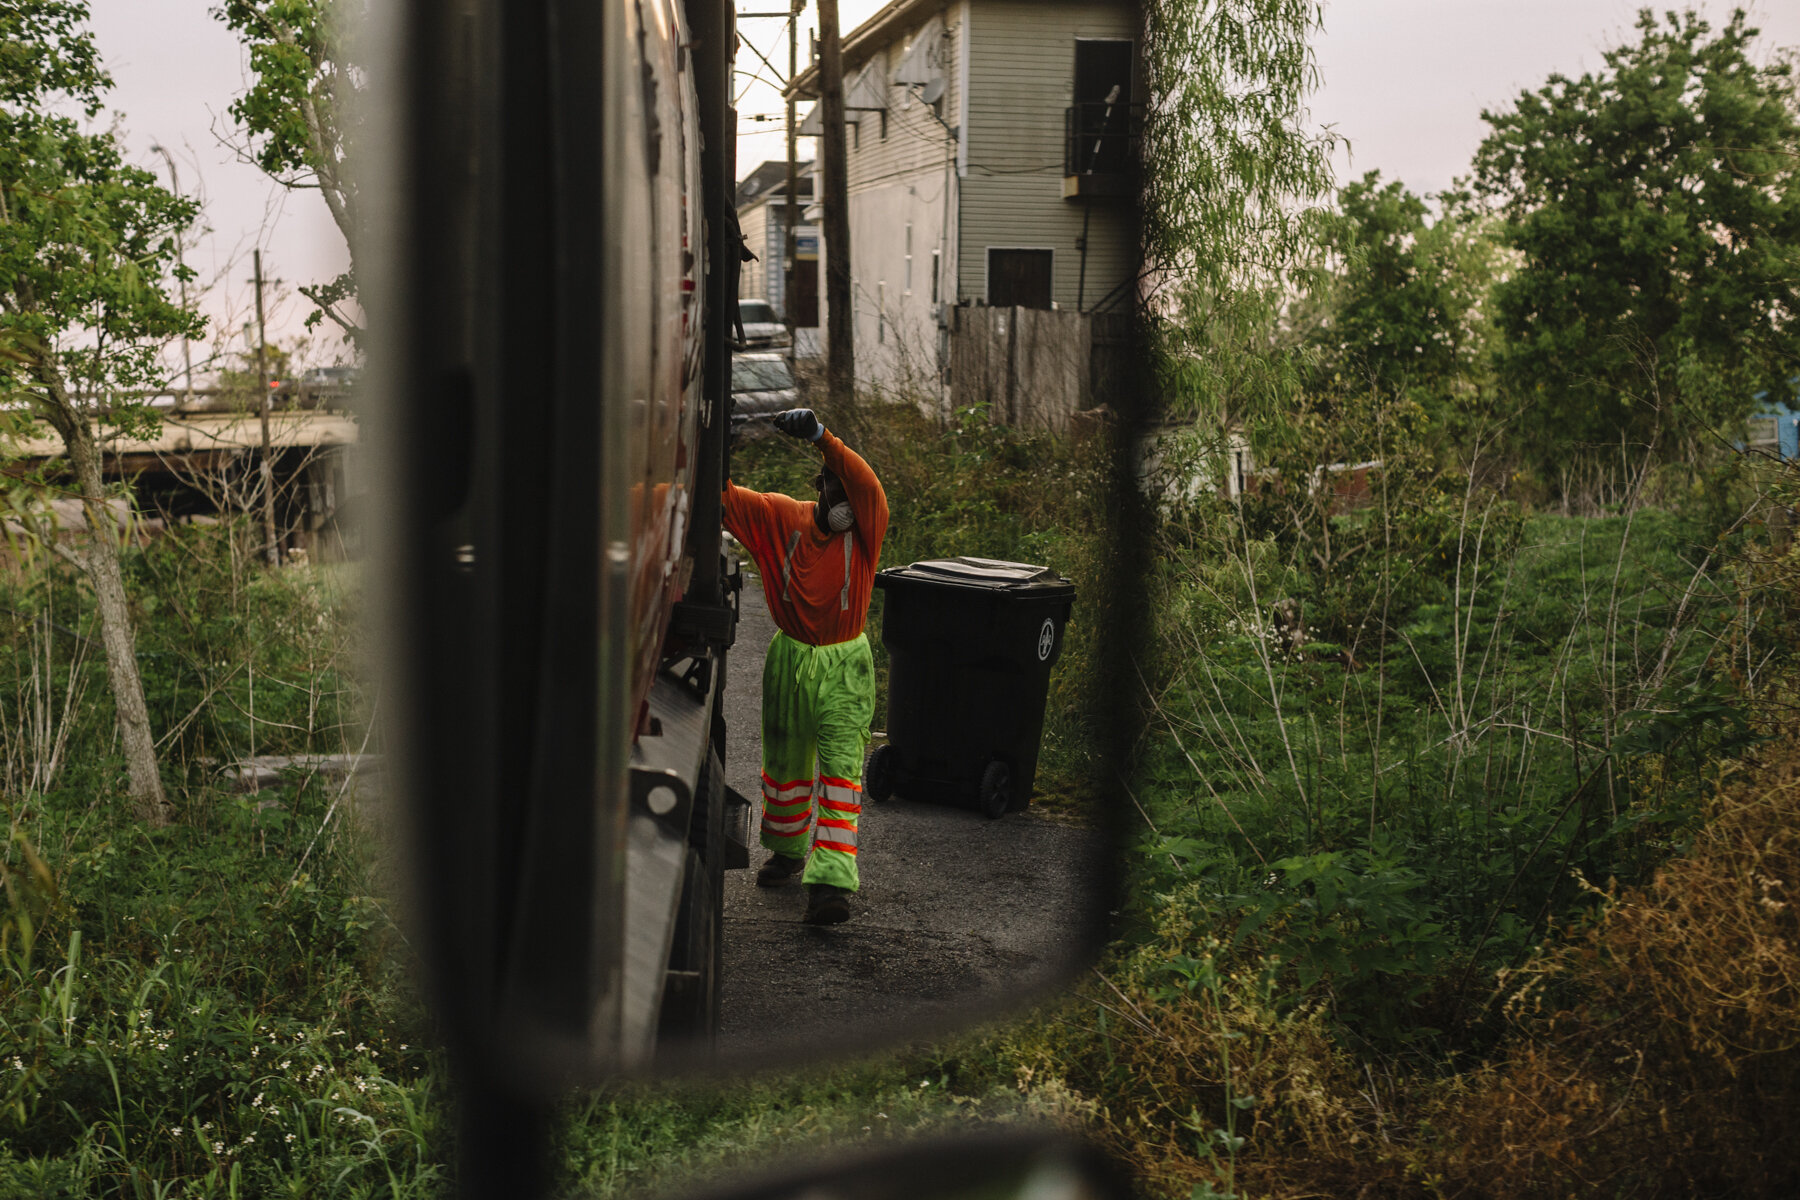  New Orleans, LA - March 24, 2020 - Bryan Bowman wipes sweat from his brown while collecting residential trash in the 7th Ward of New Orleans. His employer, Metro Service Group, has begun furnishing extra rubber gloves, facemasks, and handkerchiefs t